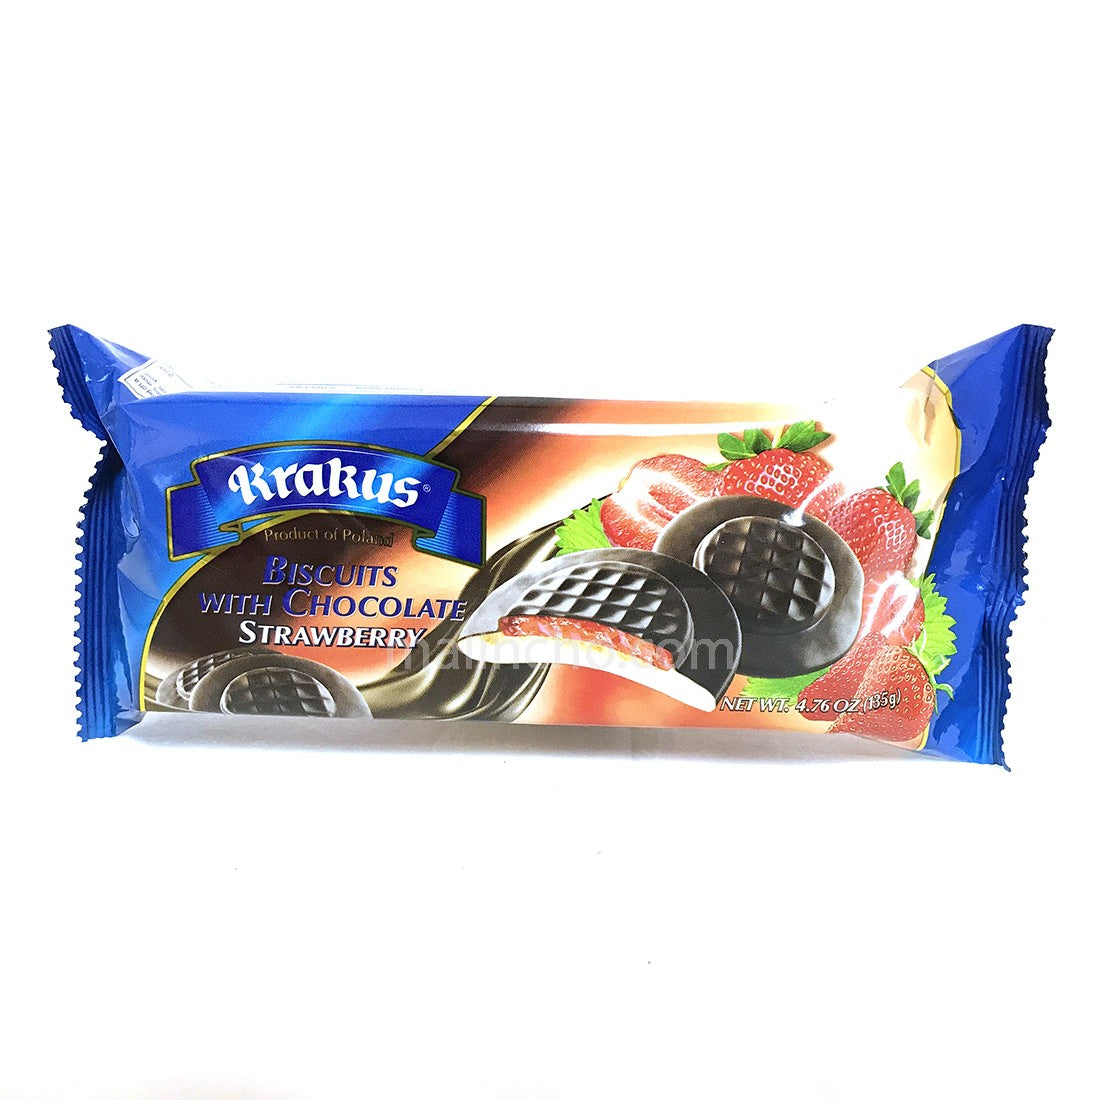 KRAKUS: Biscuits with Chocolate Strawberry, 4.76 oz - Vending Business Solutions